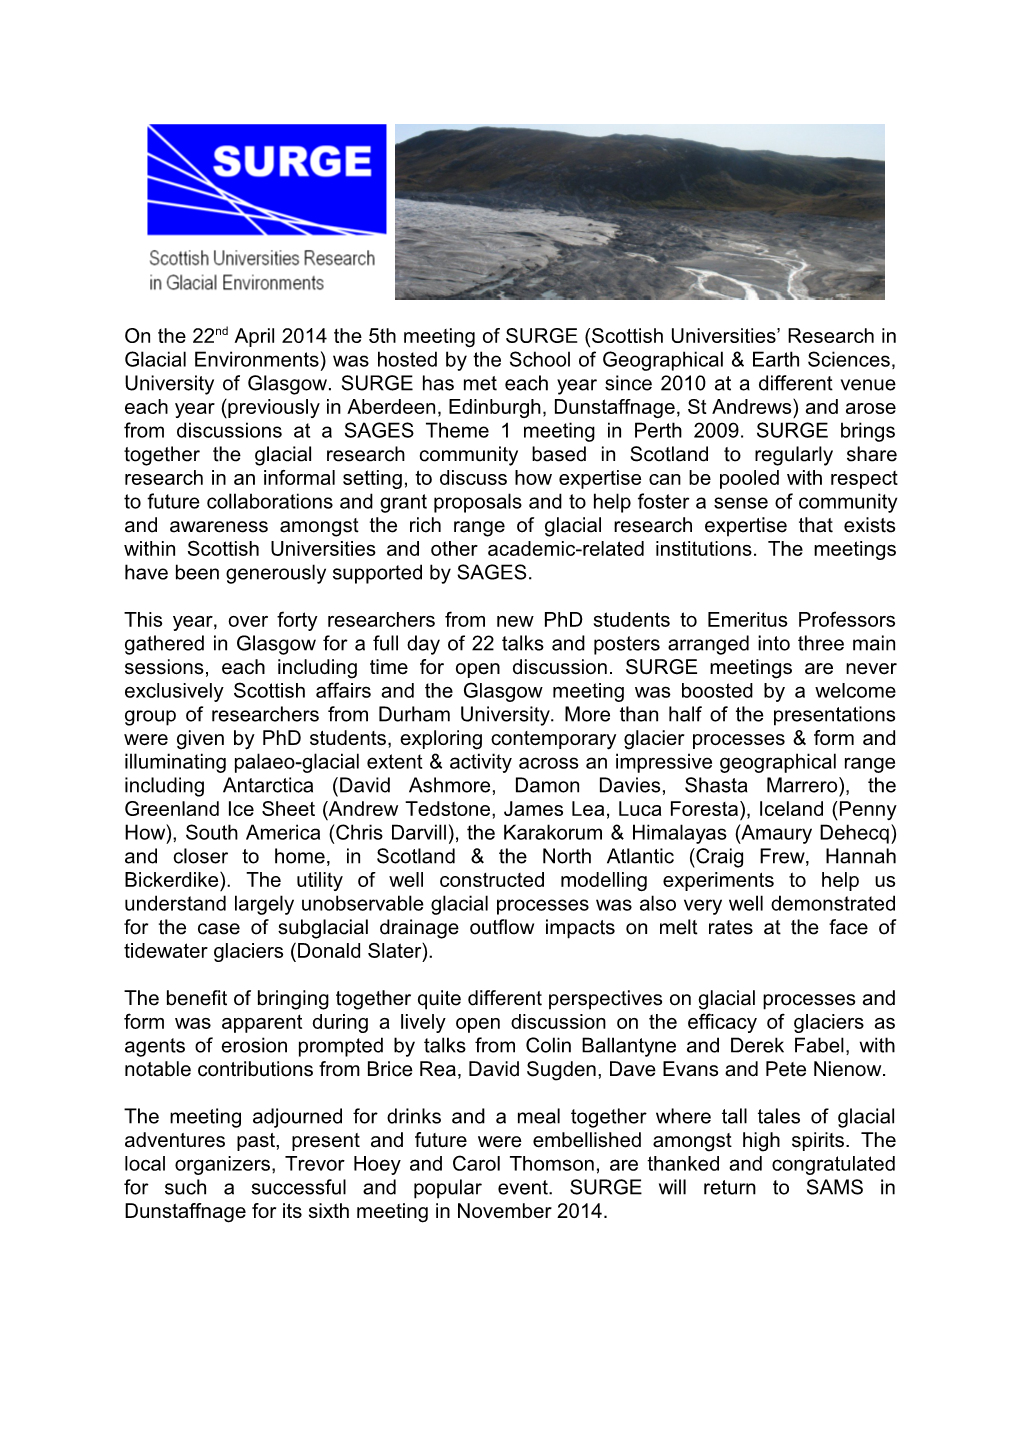 On the 22Nd April 2014 the 5Th Meeting of SURGE (Scottish Universities Research in Glacial